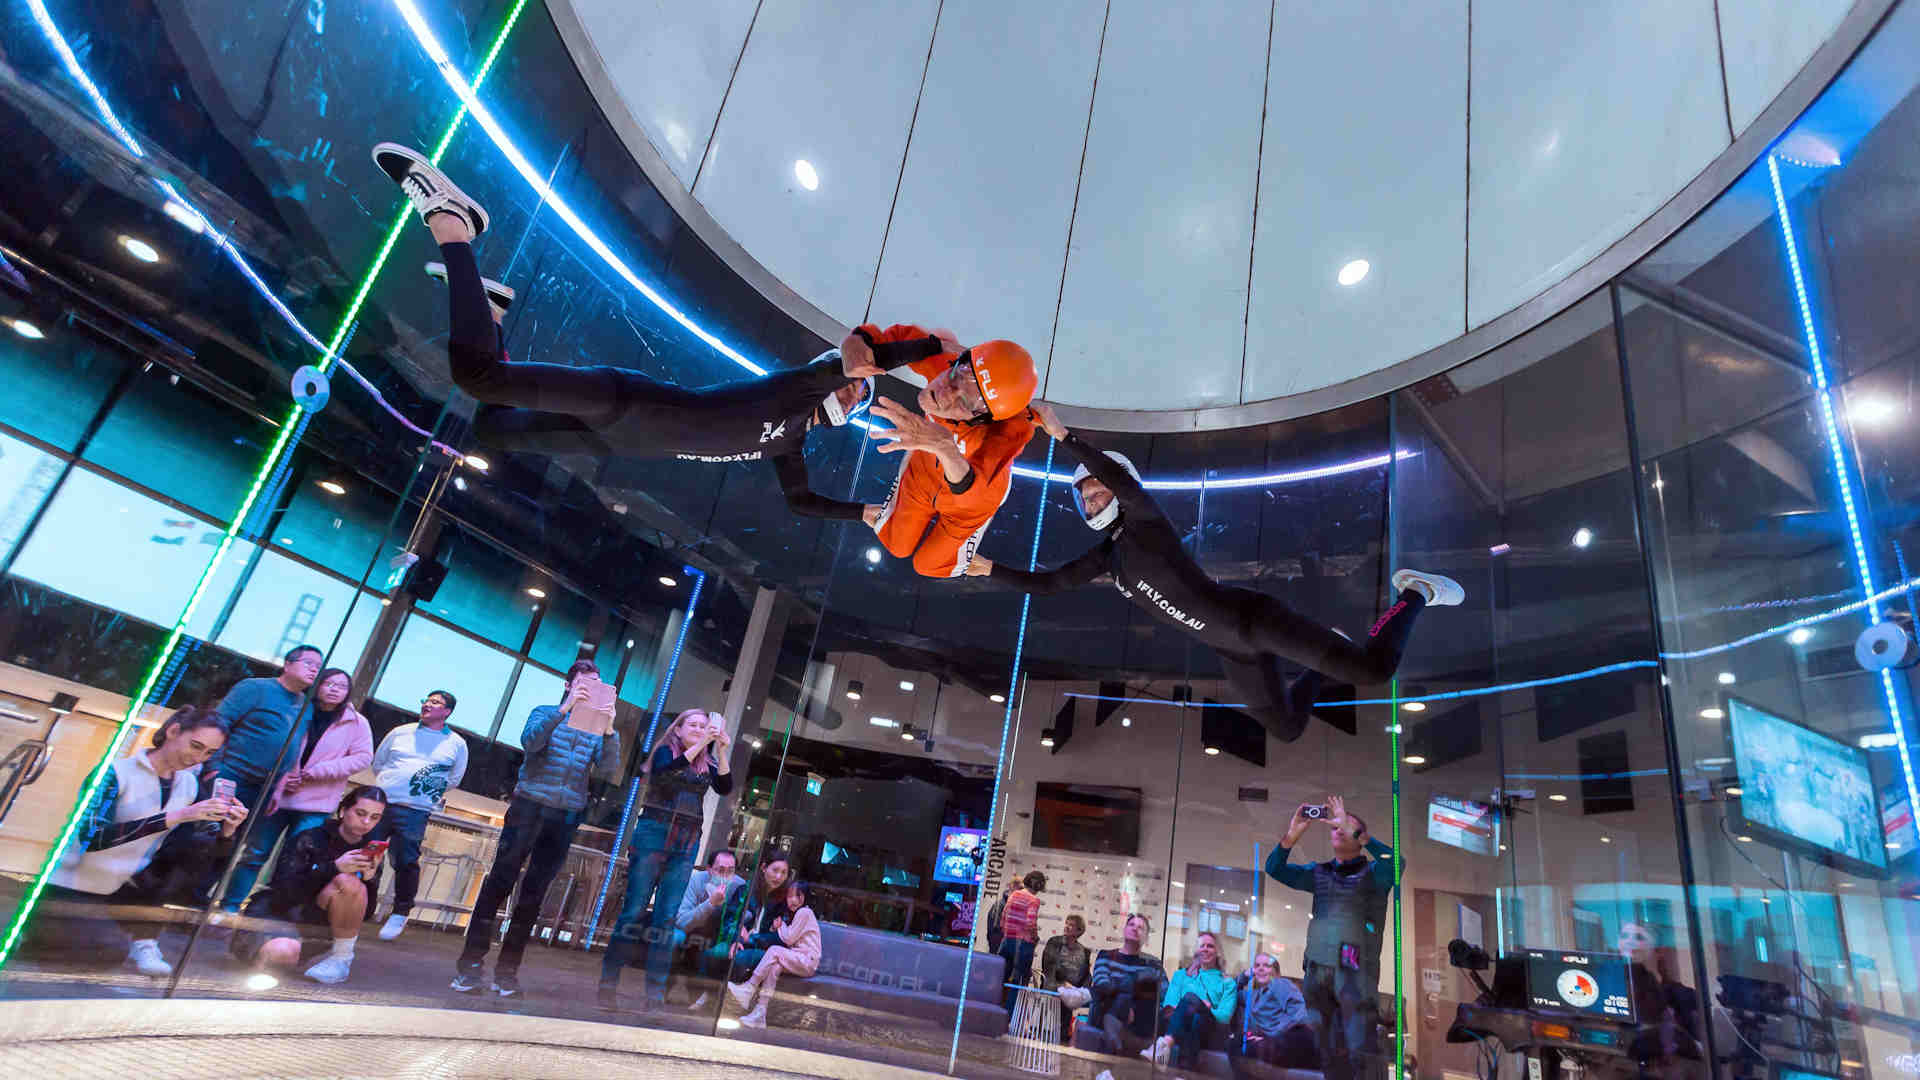 Two instructors assisting a person living with disability whilst indoor skydiving